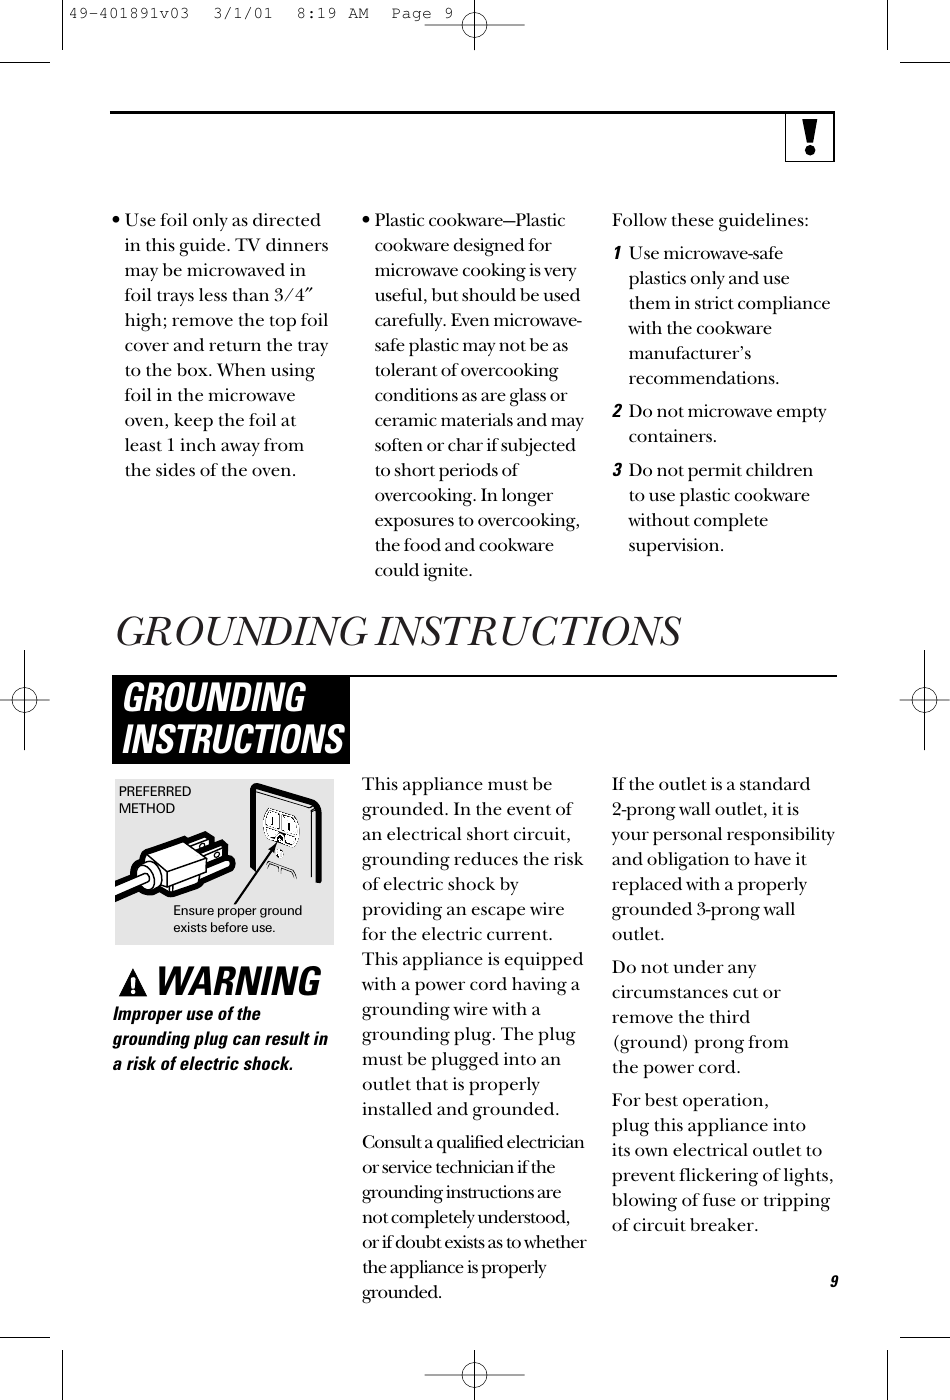 GROUNDING INSTRUCTIONS•Use foil only as directedin this guide. TV dinnersmay be microwaved infoil trays less than 3/4″high; remove the top foilcover and return the trayto the box. When usingfoil in the microwaveoven, keep the foil atleast 1 inch away from the sides of the oven.•Plastic cookware—Plasticcookware designed formicrowave cooking is veryuseful, but should be usedcarefully. Even microwave-safe plastic may not be astolerant of overcookingconditions as are glass orceramic materials and maysoften or char if subjectedto short periods ofovercooking. In longerexposures to overcooking,the food and cookwarecould ignite. Follow these guidelines: 1Use microwave-safeplastics only and use them in strict compliance with the cookwaremanufacturer’srecommendations. 2Do not microwave emptycontainers. 3Do not permit children to use plastic cookwarewithout completesupervision.WARNINGImproper use of thegrounding plug can result ina risk of electric shock.This appliance must begrounded. In the event ofan electrical short circuit,grounding reduces the riskof electric shock byproviding an escape wirefor the electric current.This appliance is equippedwith a power cord having agrounding wire with agrounding plug. The plugmust be plugged into anoutlet that is properlyinstalled and grounded.Consult a qualified electricianor service technician if thegrounding instructions arenot completely understood,or if doubt exists as to whetherthe appliance is properlygrounded.If the outlet is a standard 2-prong wall outlet, it isyour personal responsibilityand obligation to have itreplaced with a properlygrounded 3-prong walloutlet.Do not under anycircumstances cut orremove the third (ground) prong from the power cord.For best operation, plug this appliance into its own electrical outlet toprevent flickering of lights,blowing of fuse or trippingof circuit breaker.GROUNDINGINSTRUCTIONSEnsure proper groundexists before use.PREFERREDMETHOD949-401891v03  3/1/01  8:19 AM  Page 9